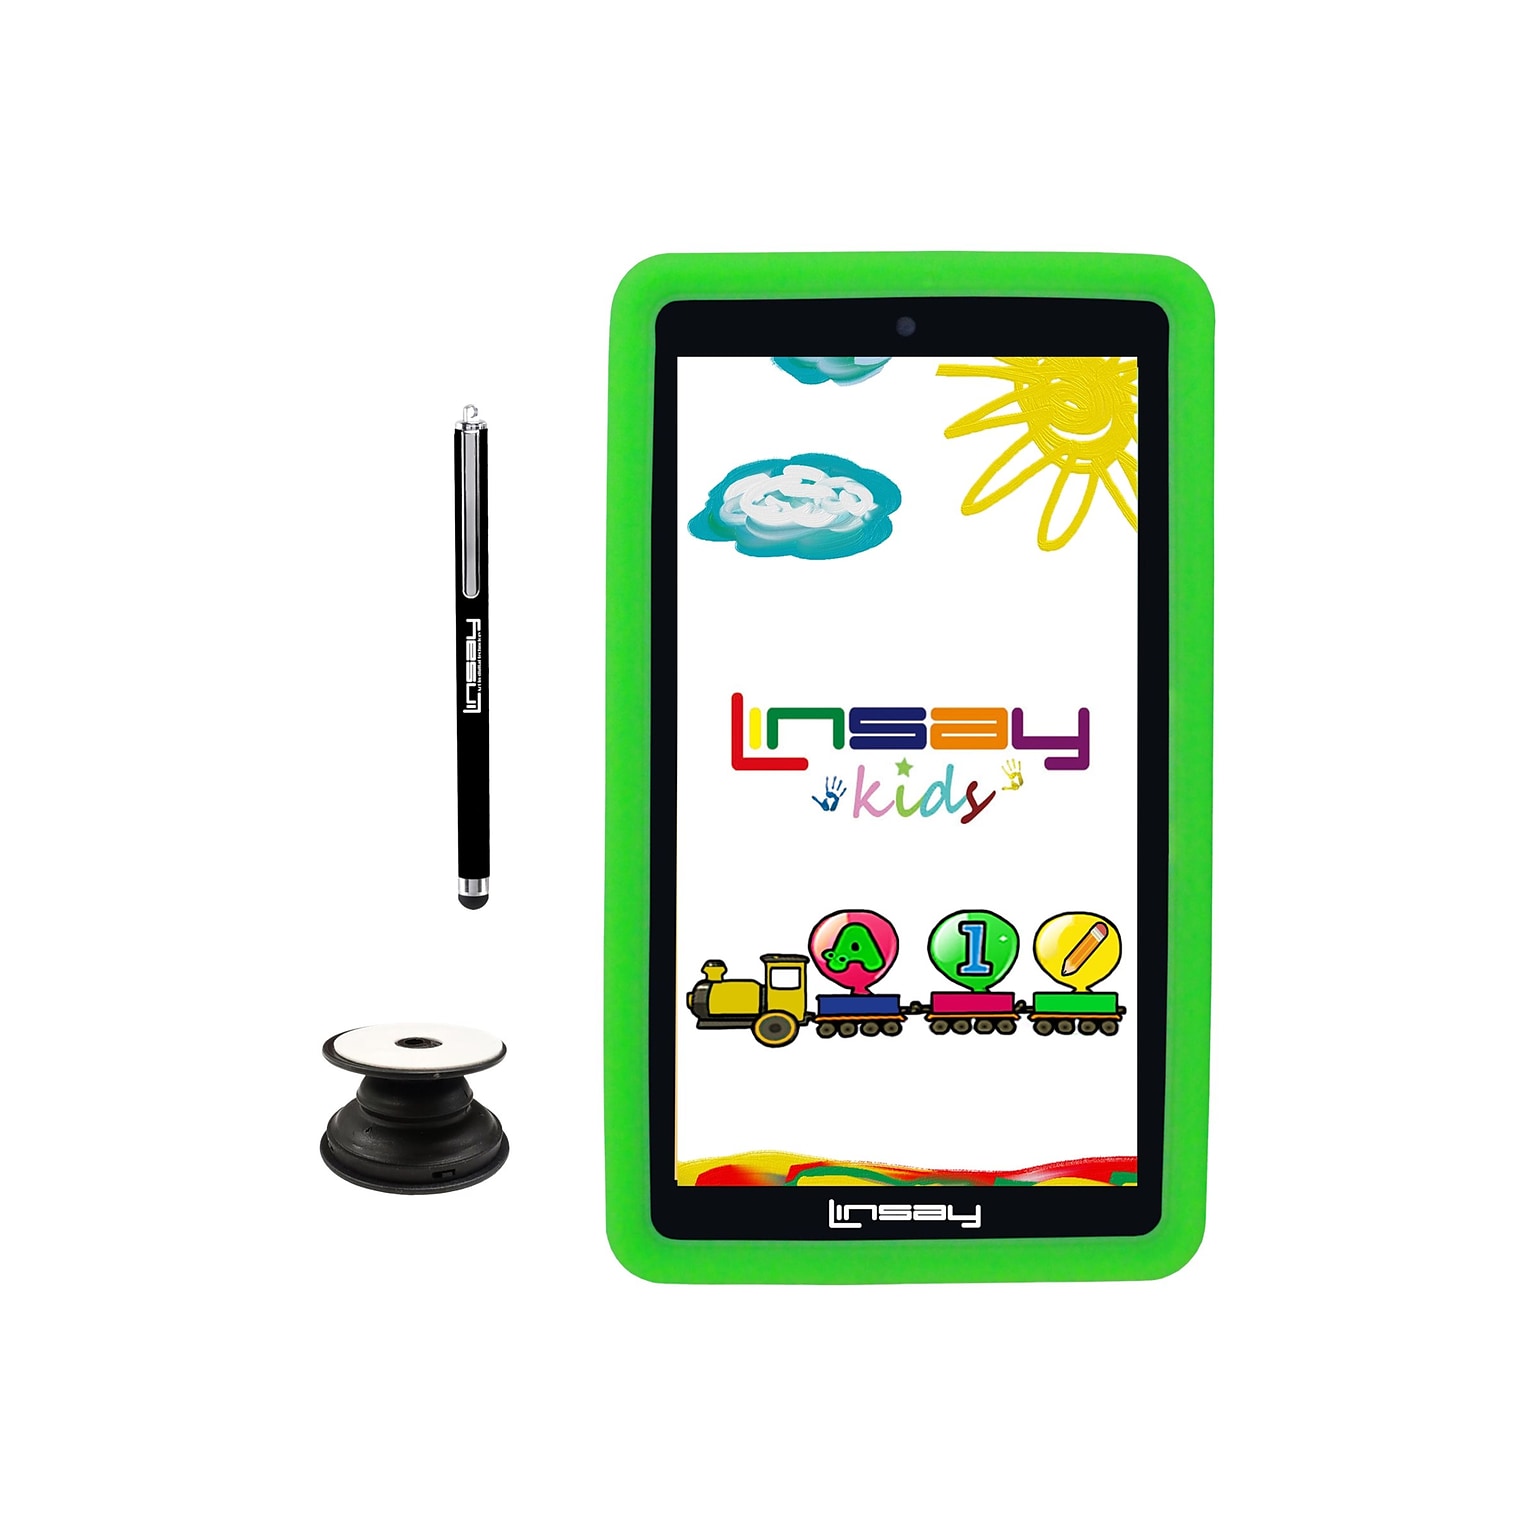 Linsay 7 Tablet with Holder, Pen, and Case, WiFi, 2GB RAM, 64GB Storage, Android 13, Green/Black (F7UHDKIDSGREENP)